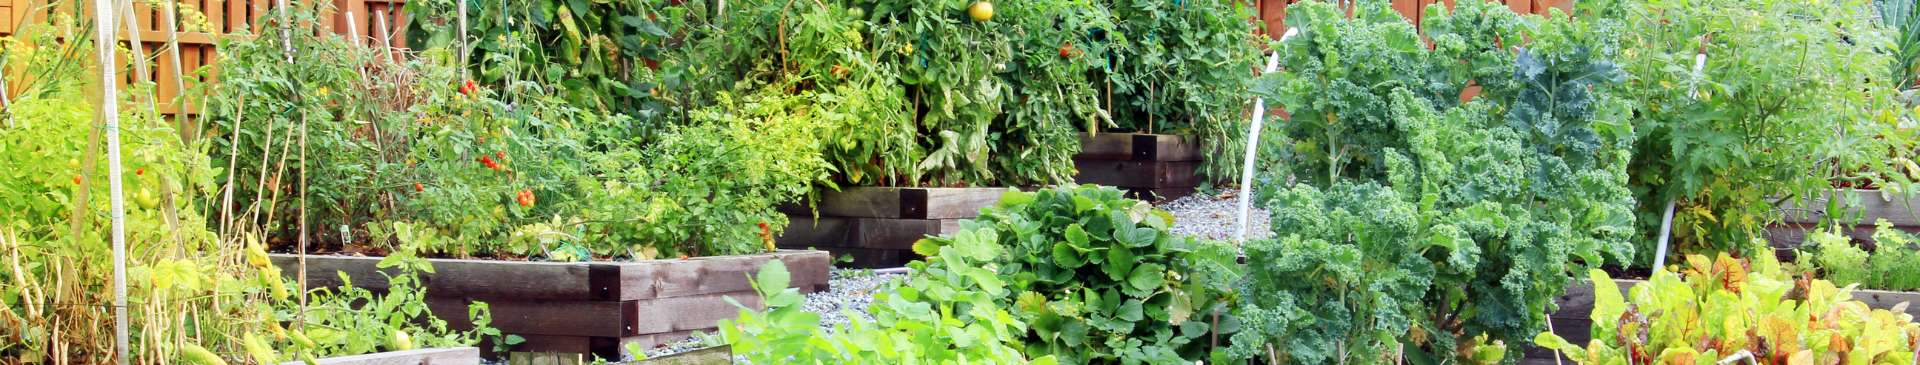 Turning a Sloped Block into a Productive Vegetable Garden